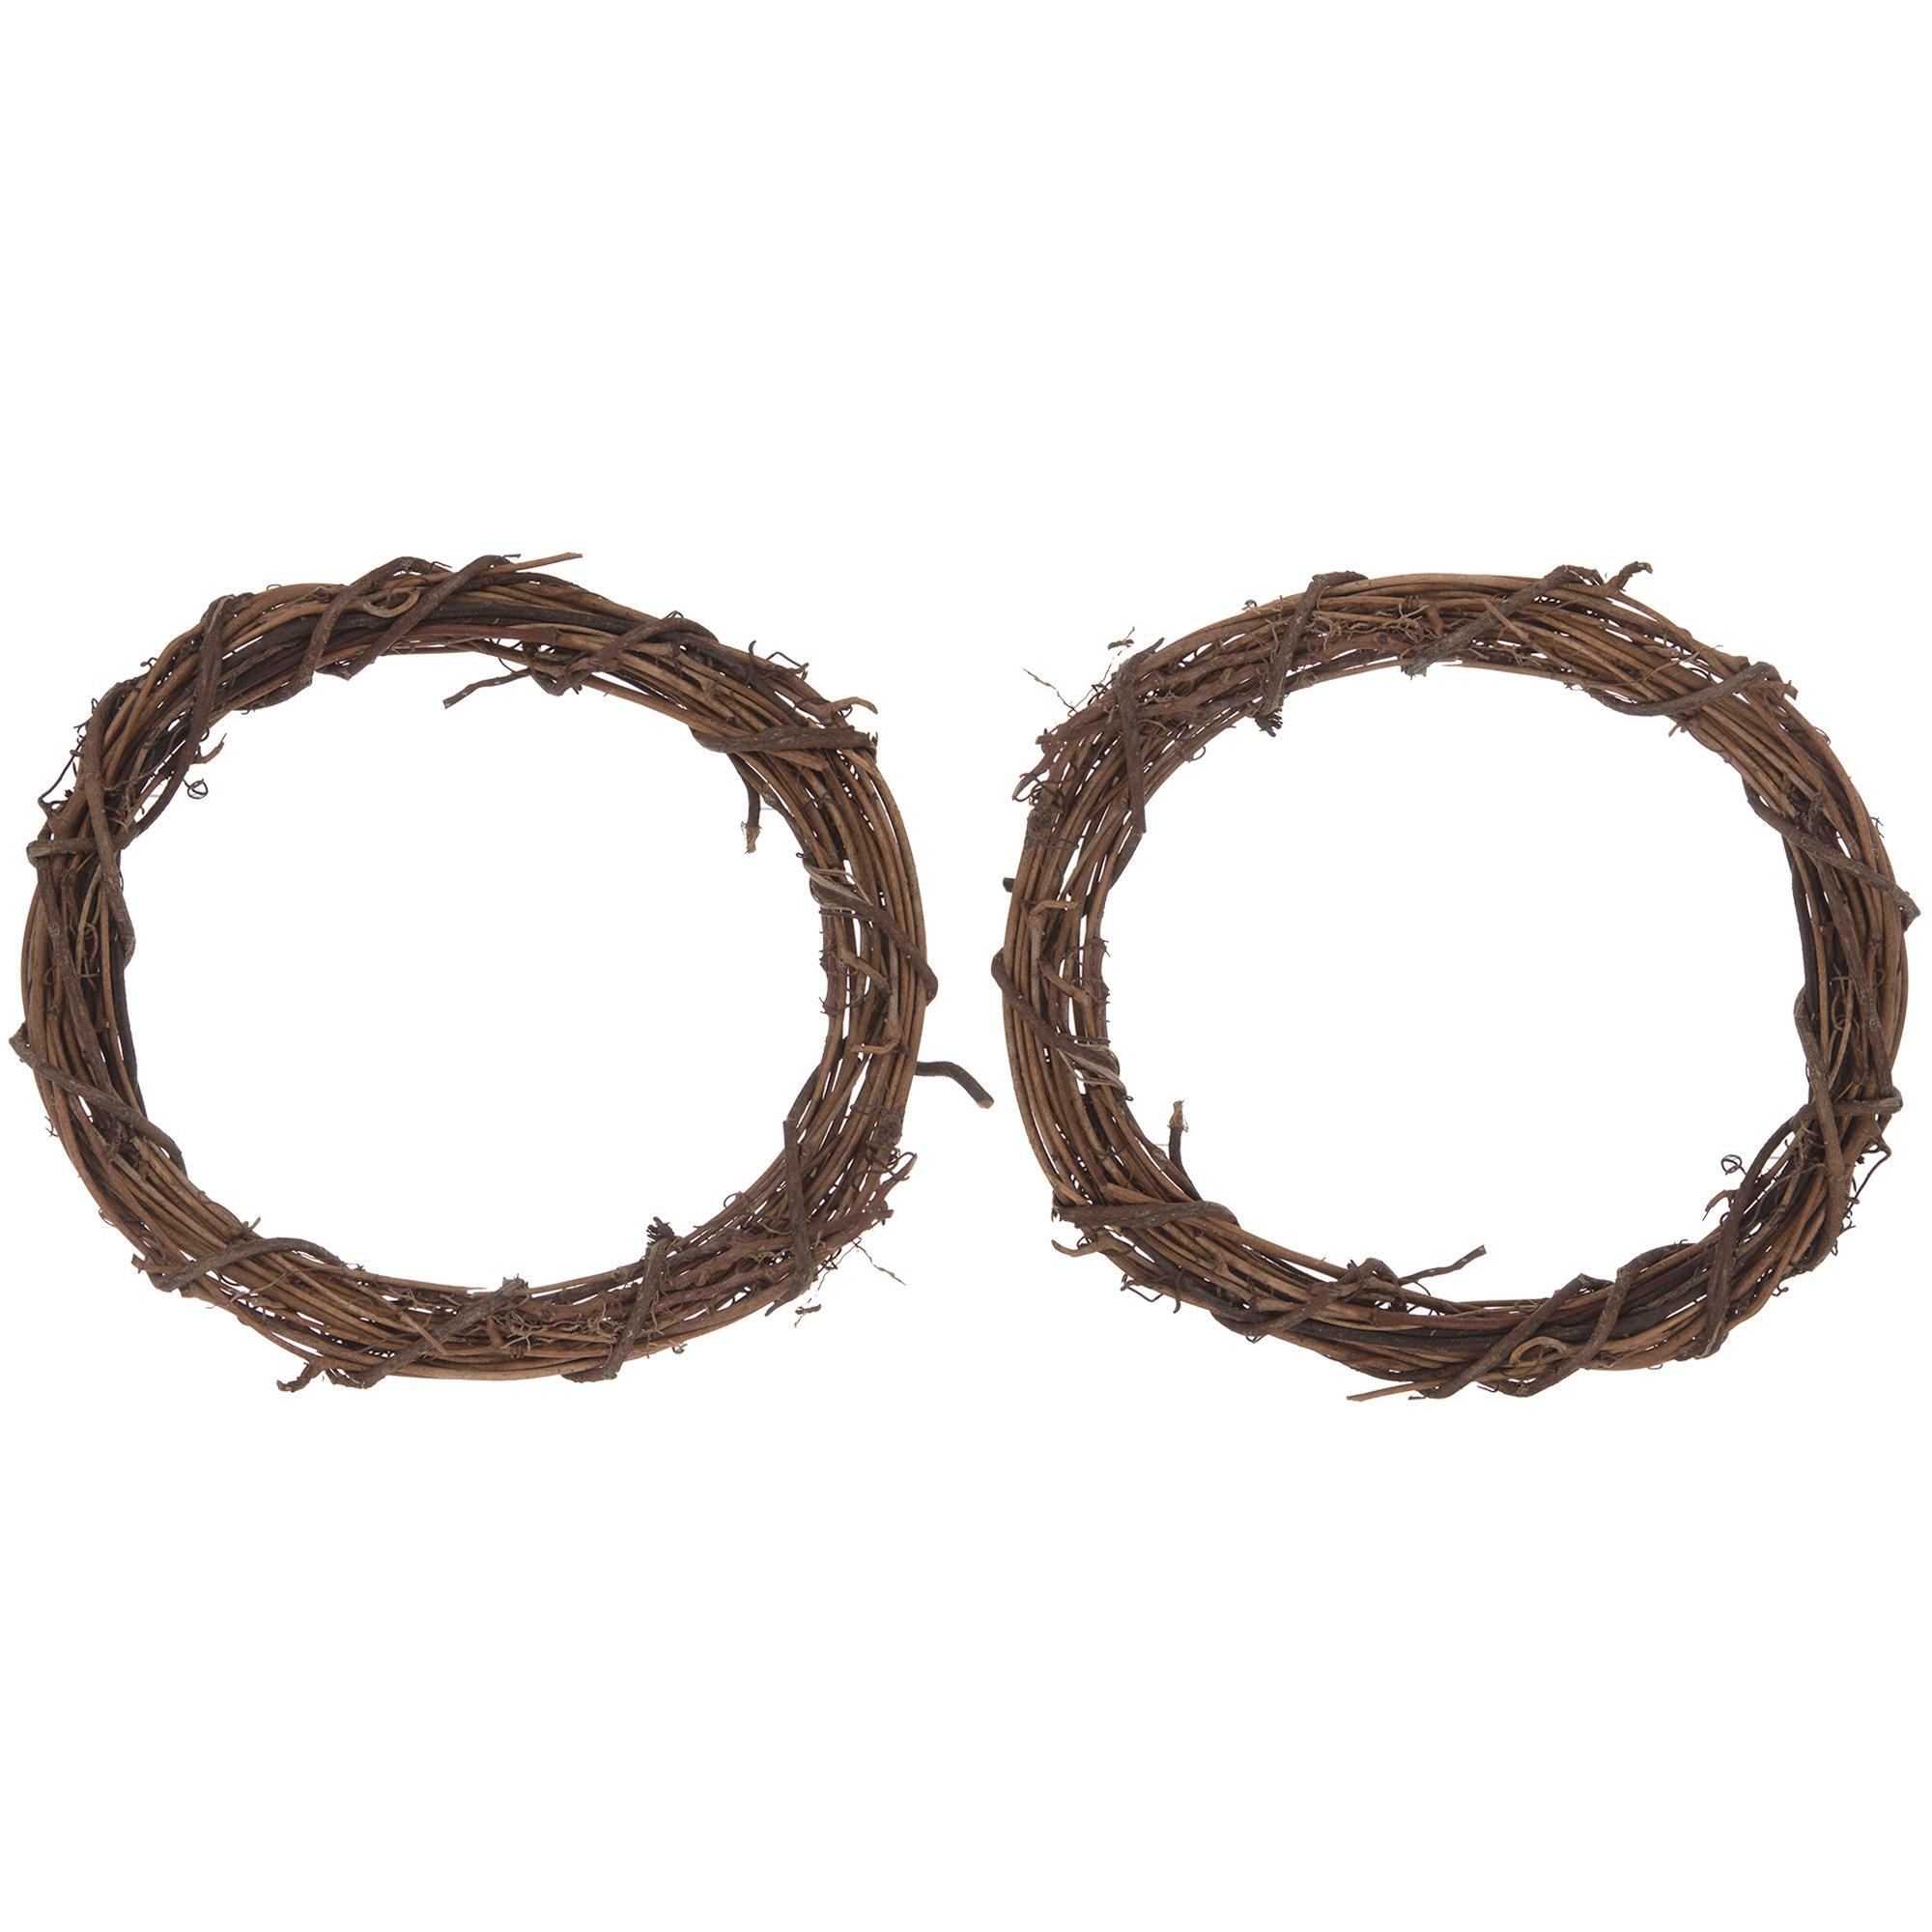 15 Feet of Eco Friendly and Naturally Dried Grapevine Twig Garland